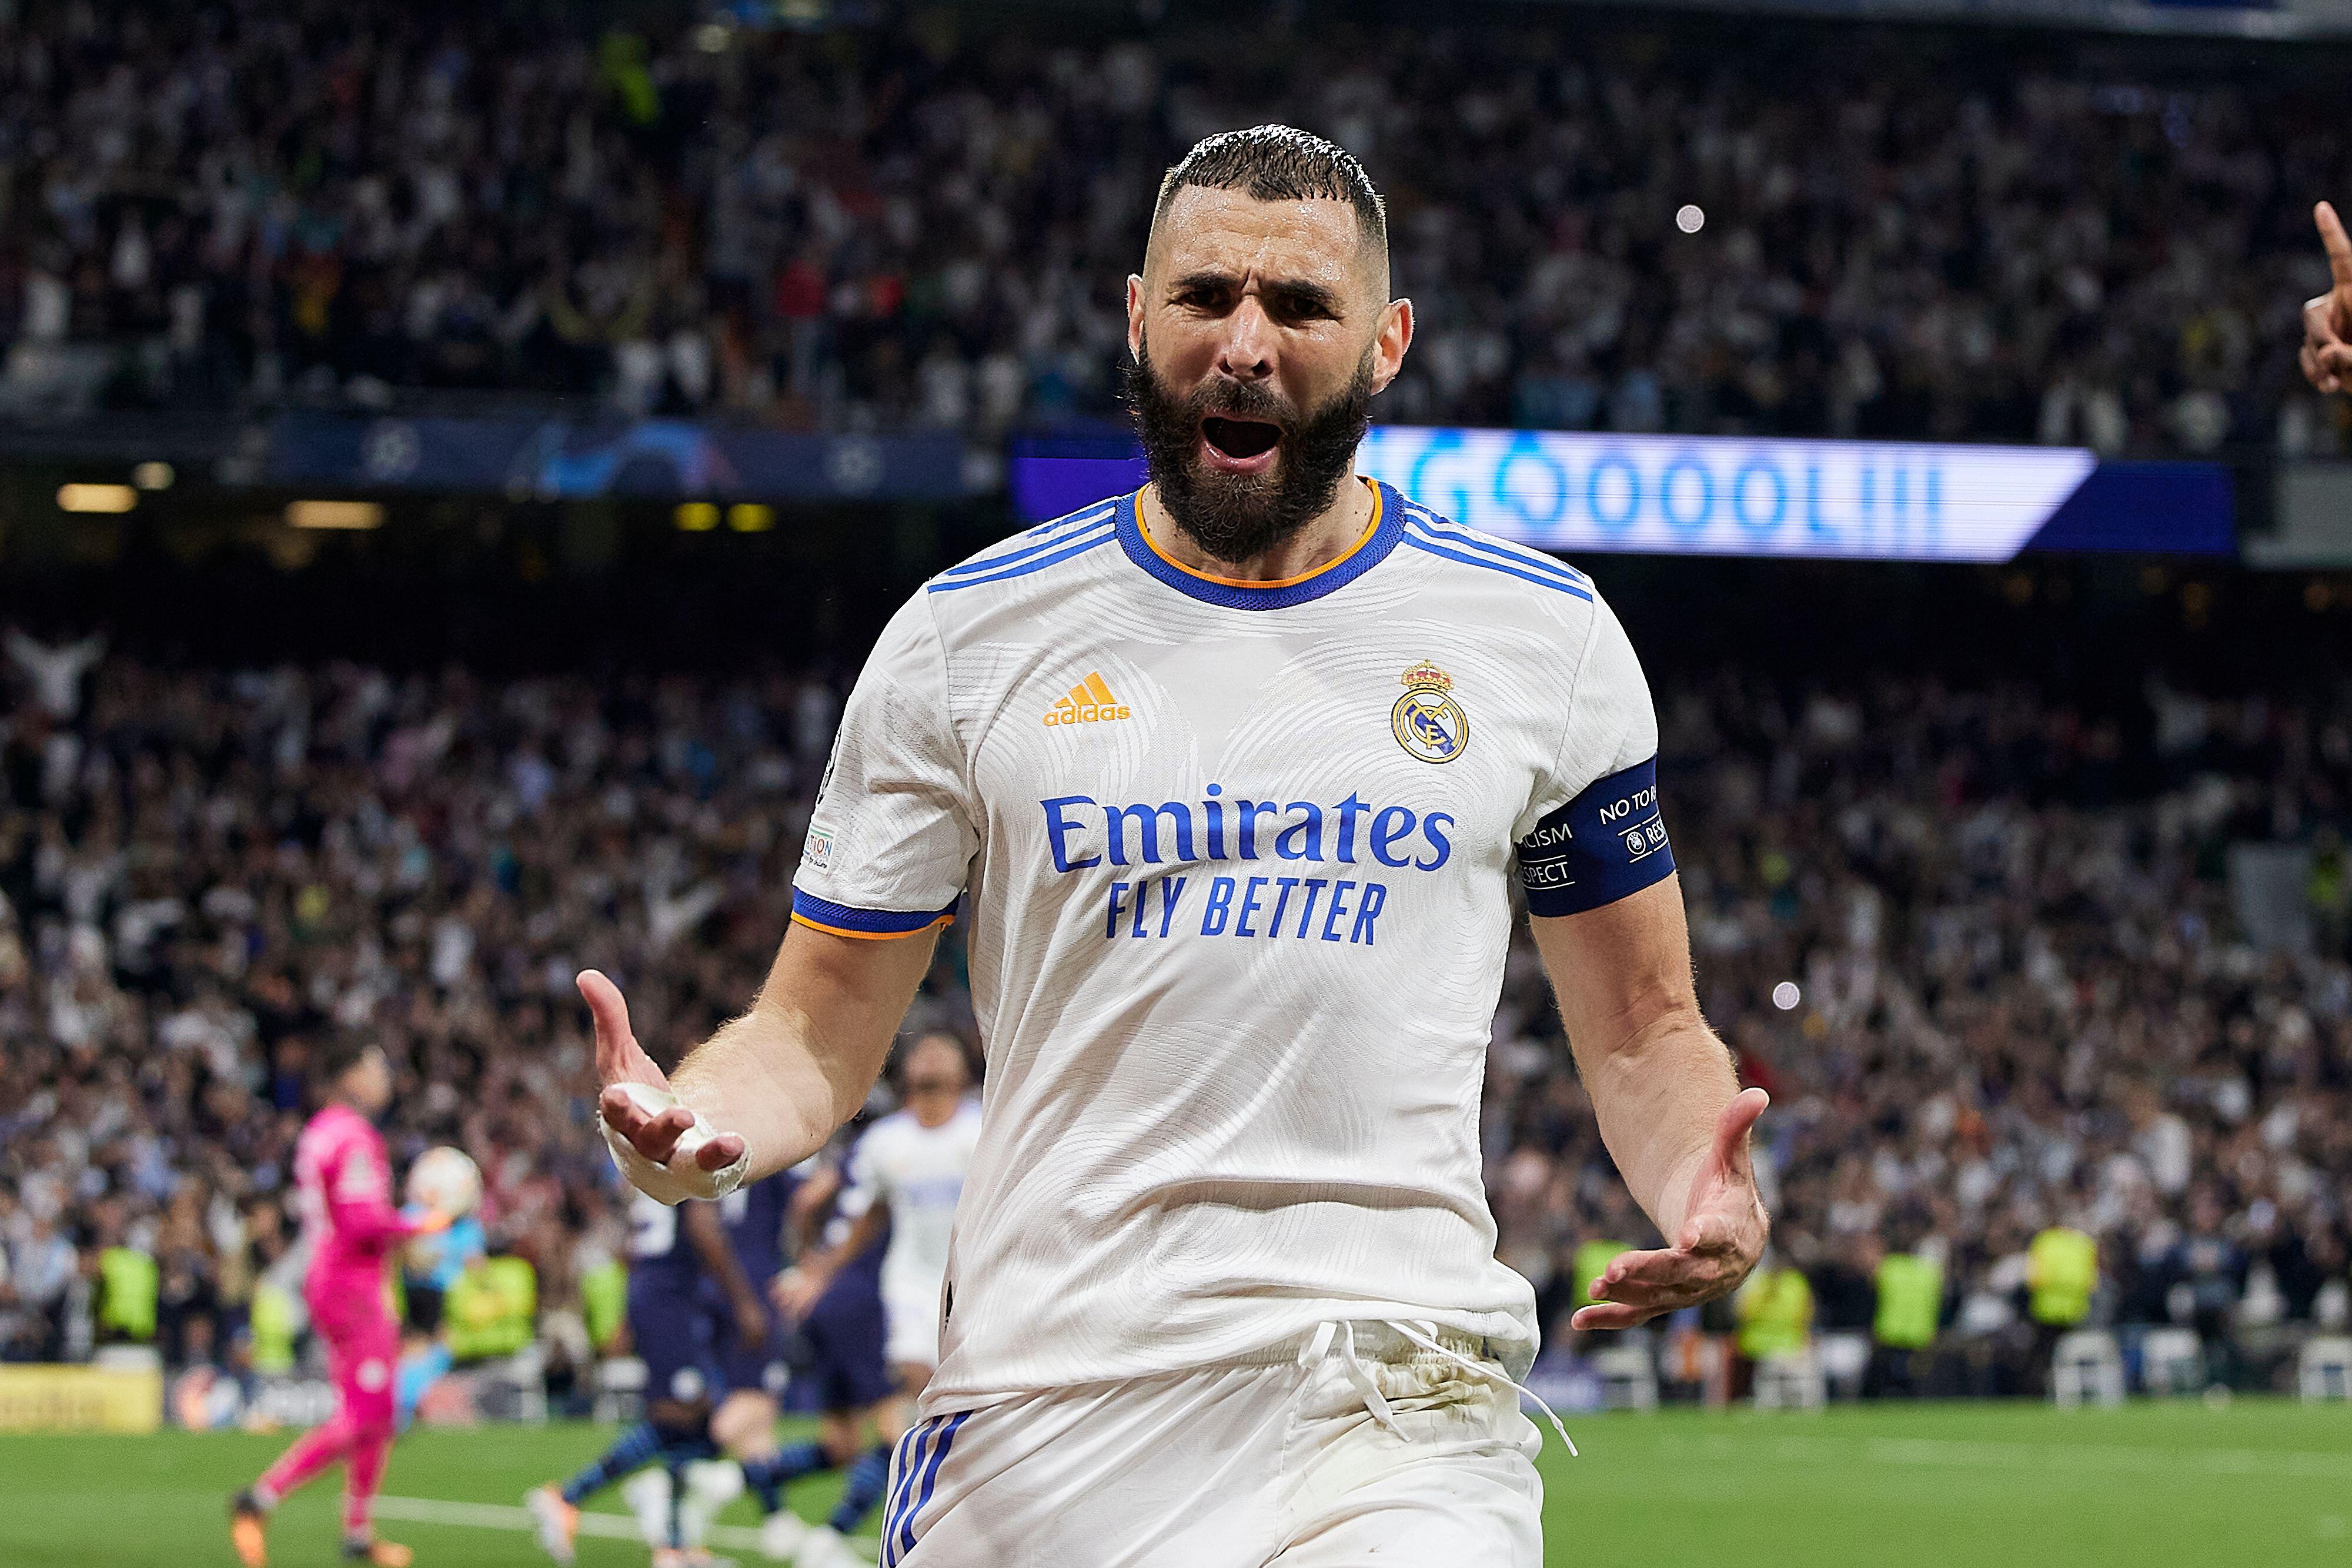 Champions League Semi-Final: COMEBACK KINGS Real Madrid beat Manchester City in EXTRA-TIME to reach UCL FINAL: Man City are ELIMINATED, Real Madrid face Liverpool in Champions League FINAL